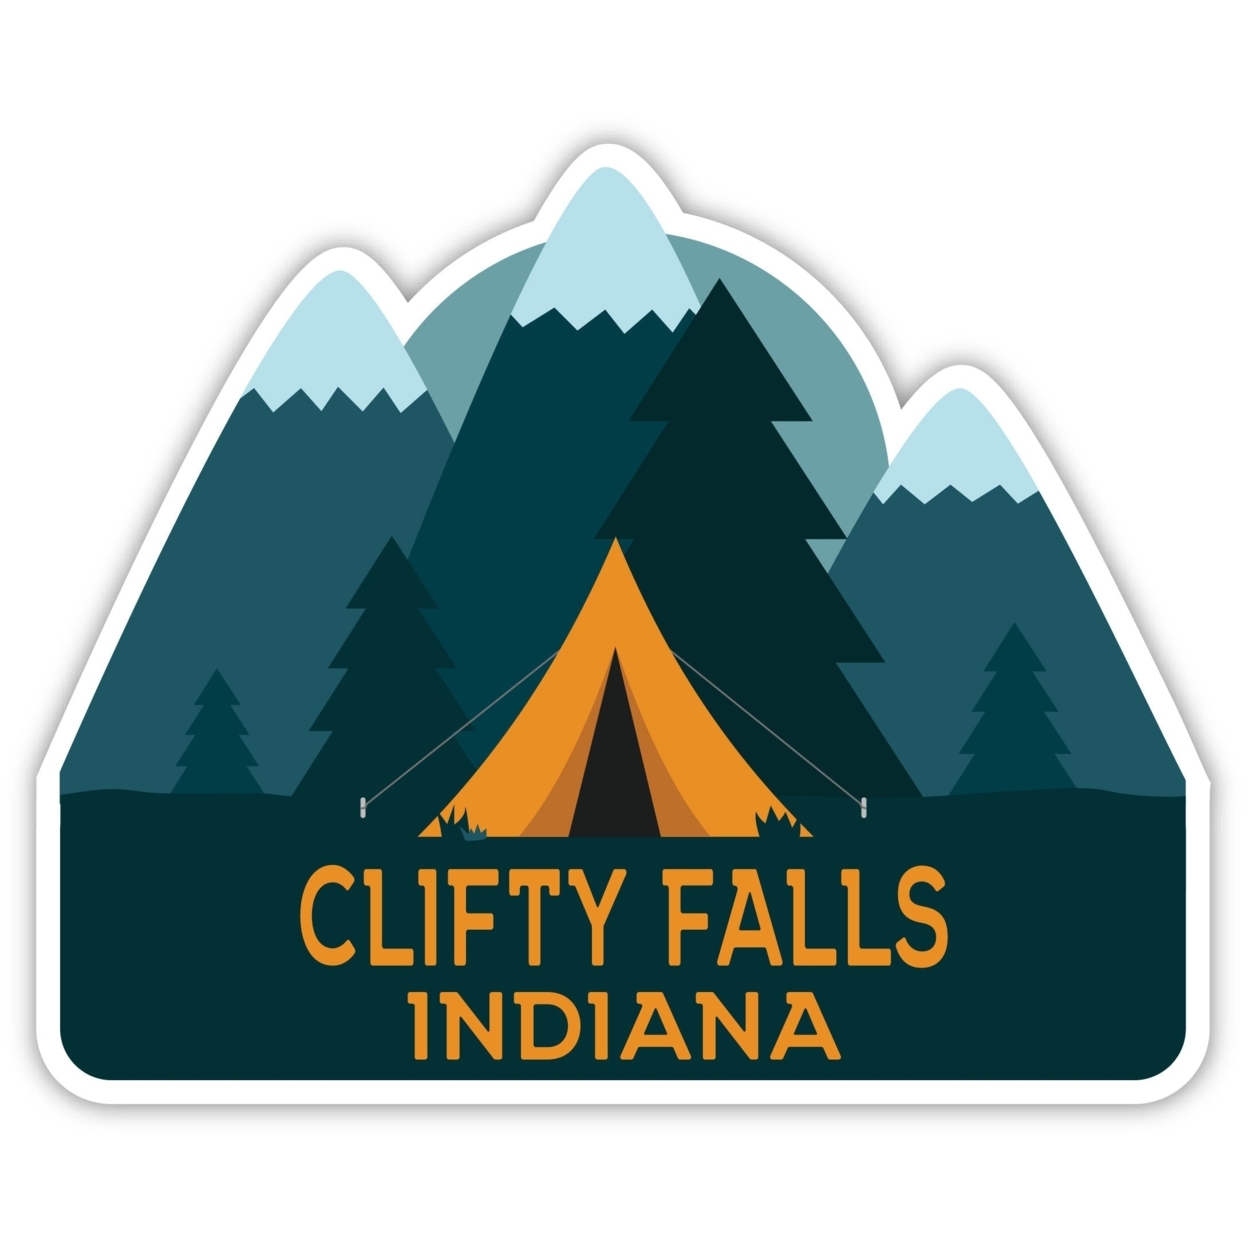 Clifty Falls Indiana Souvenir Decorative Stickers (Choose Theme And Size) - 4-Pack, 2-Inch, Tent